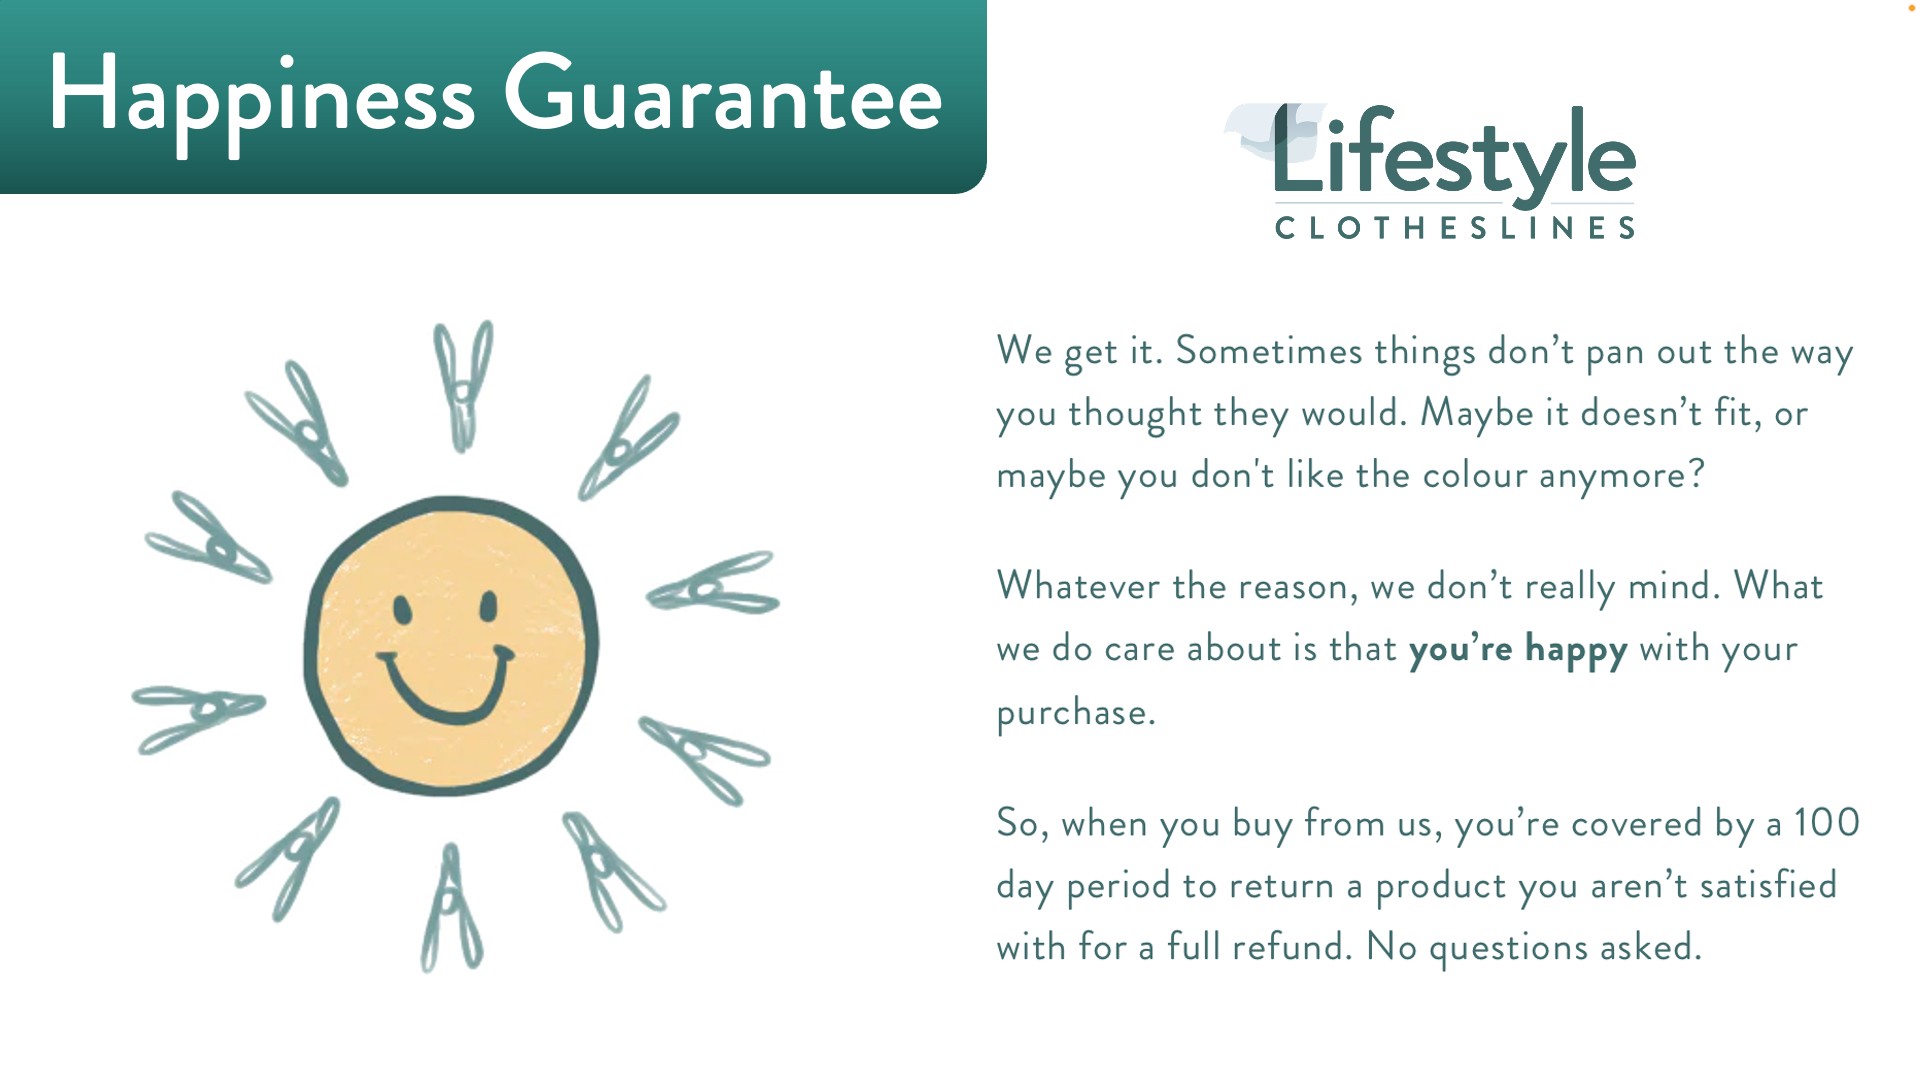 2.4m clothesline purchase 100 day happiness guarantee